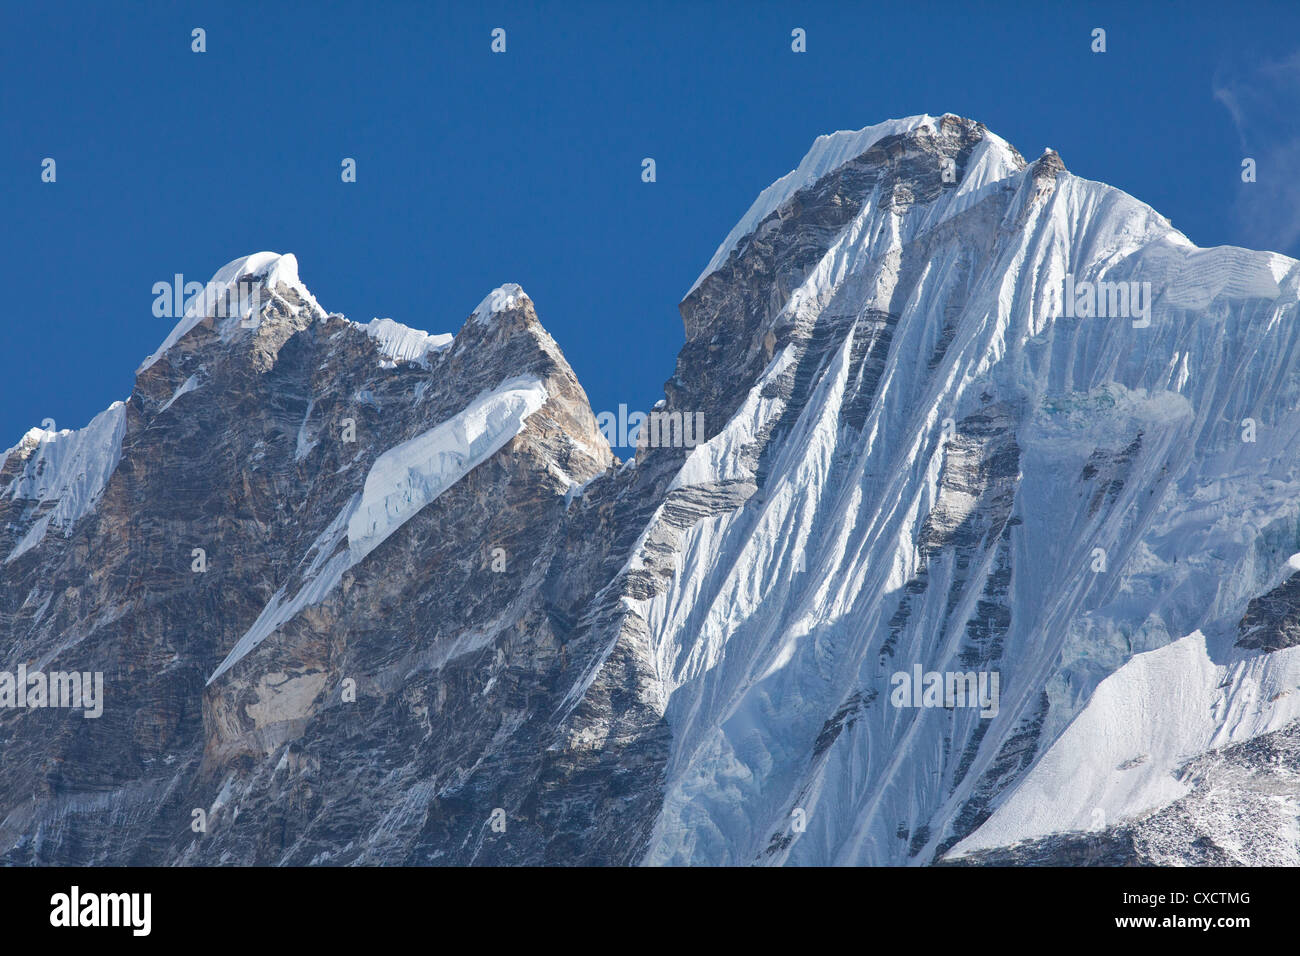 Stunning huge snowcapped mountain in the Himalayas, Nepal Stock Photo